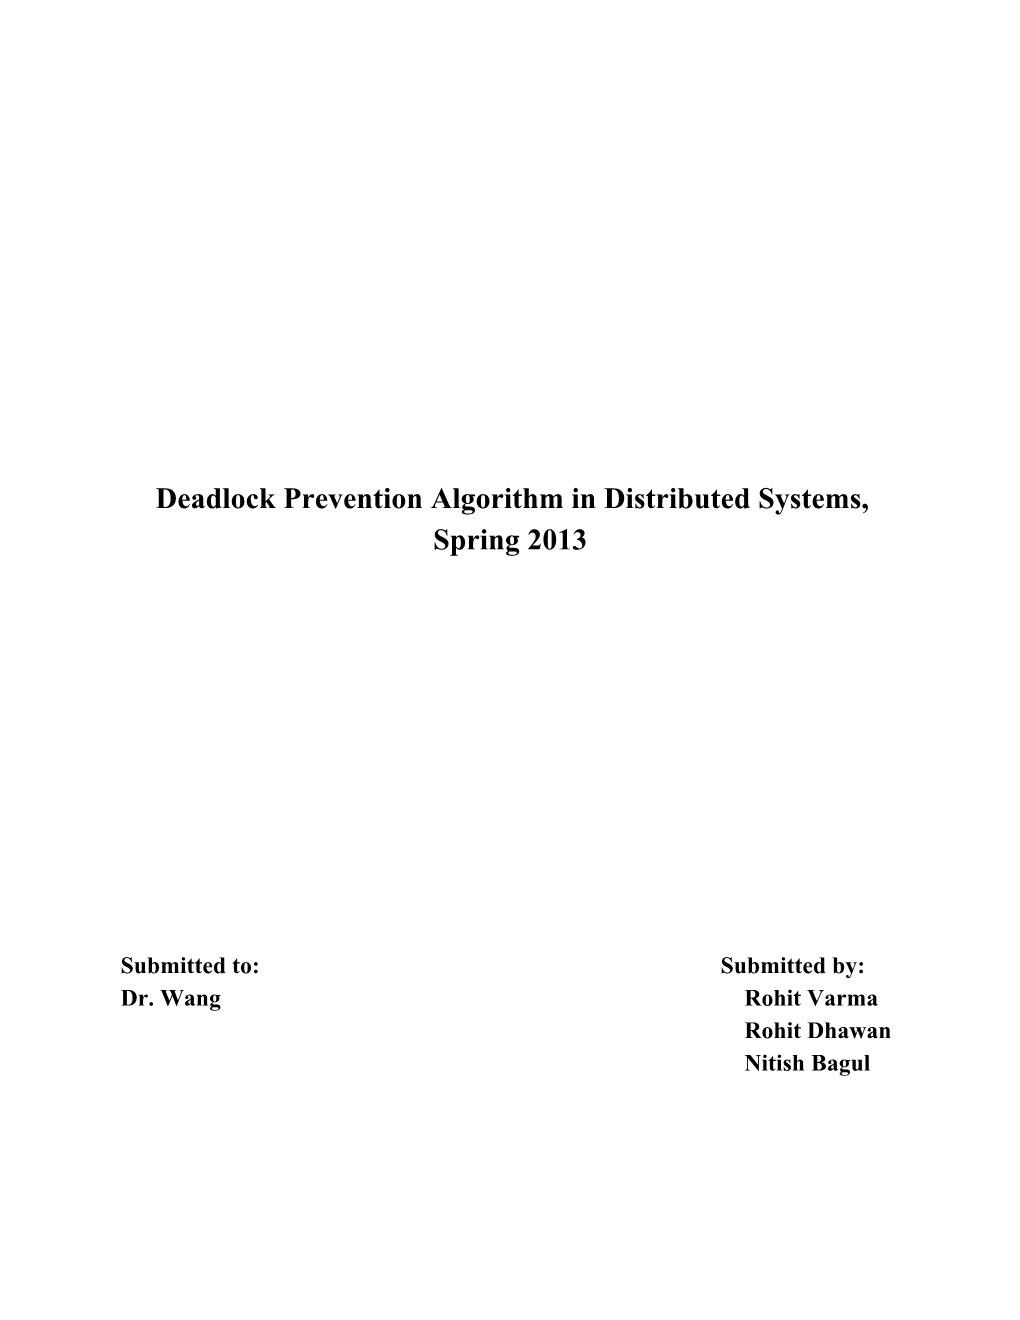 Deadlock Prevention Algorithm in Distributed Systems, Spring 2013